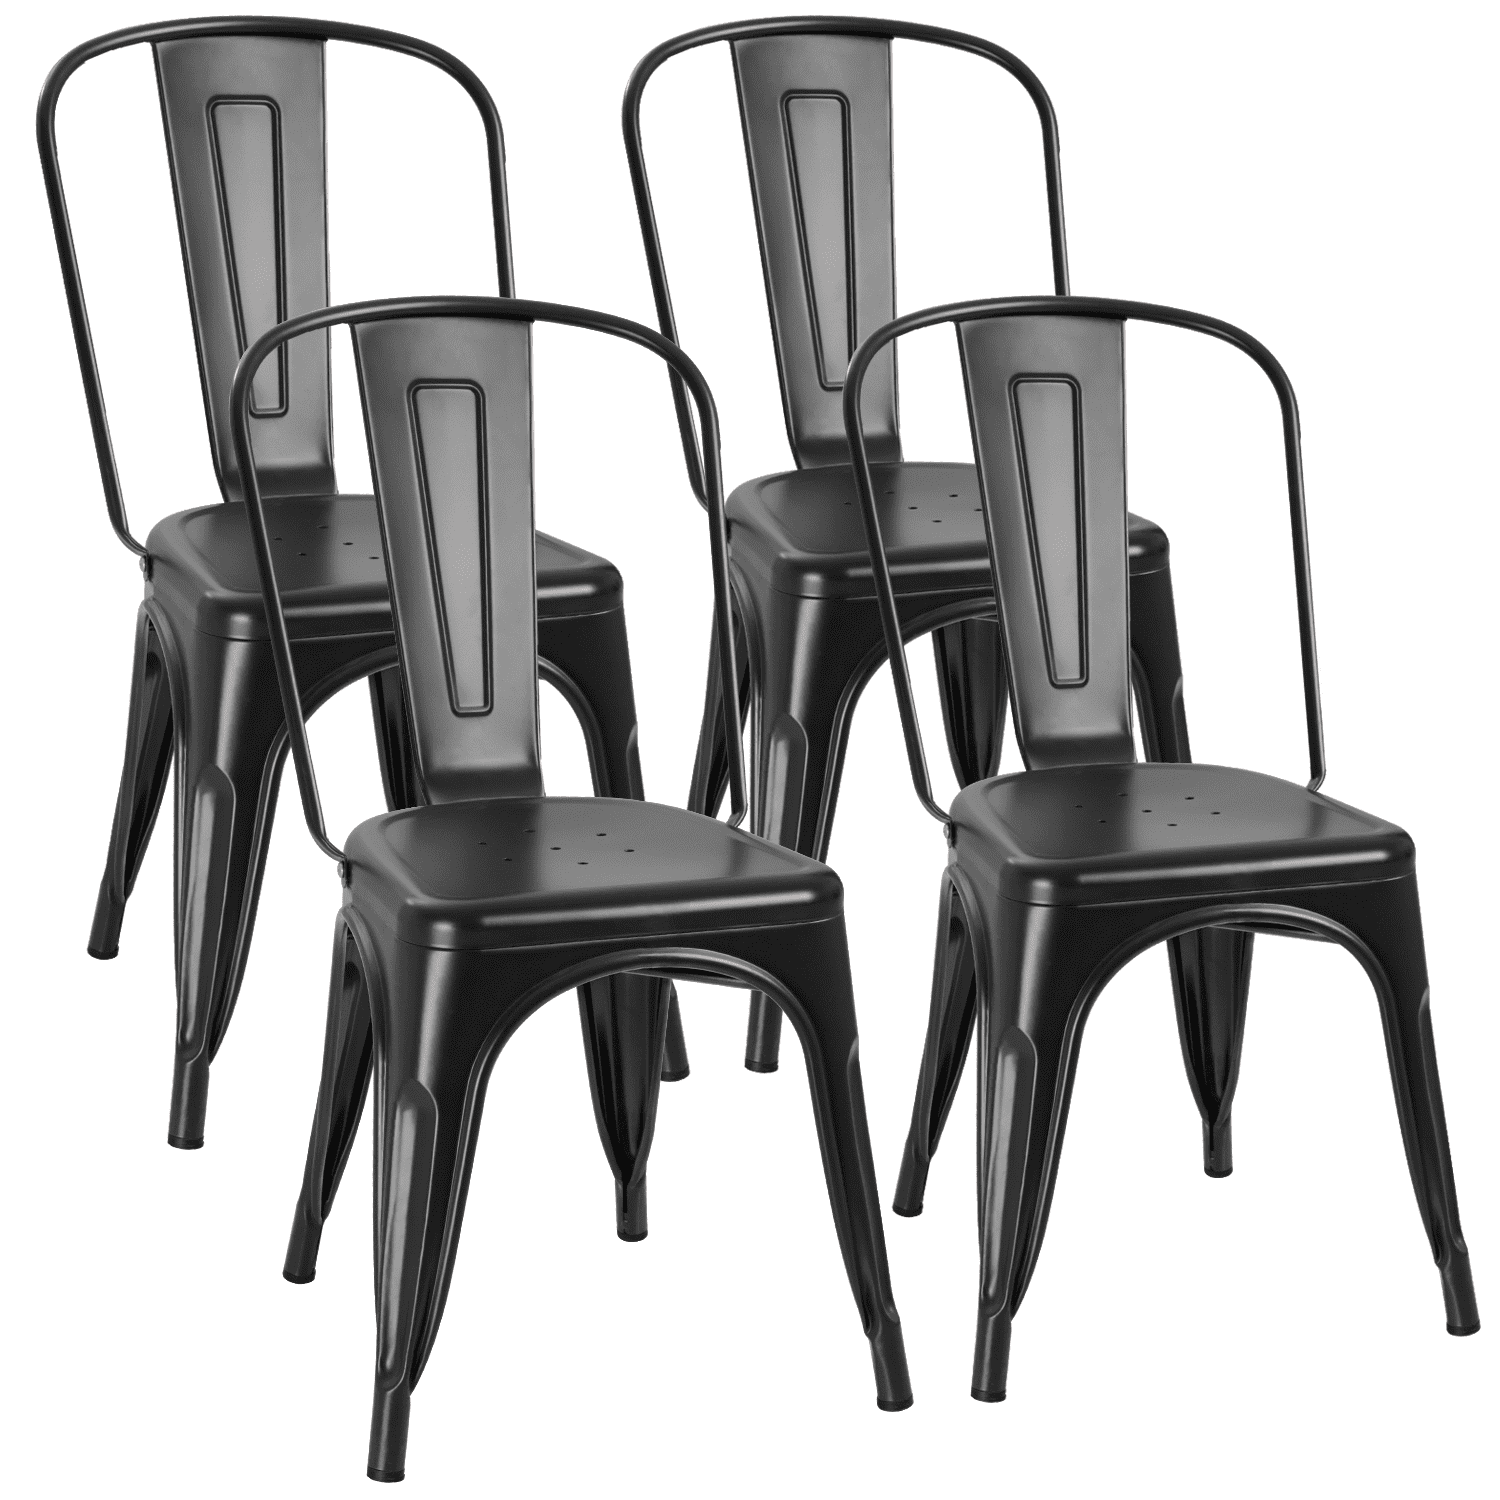 Antique Black Set of 4 Metal Chairs Stackable Dining Room Chairs Indoor/Outdoor 